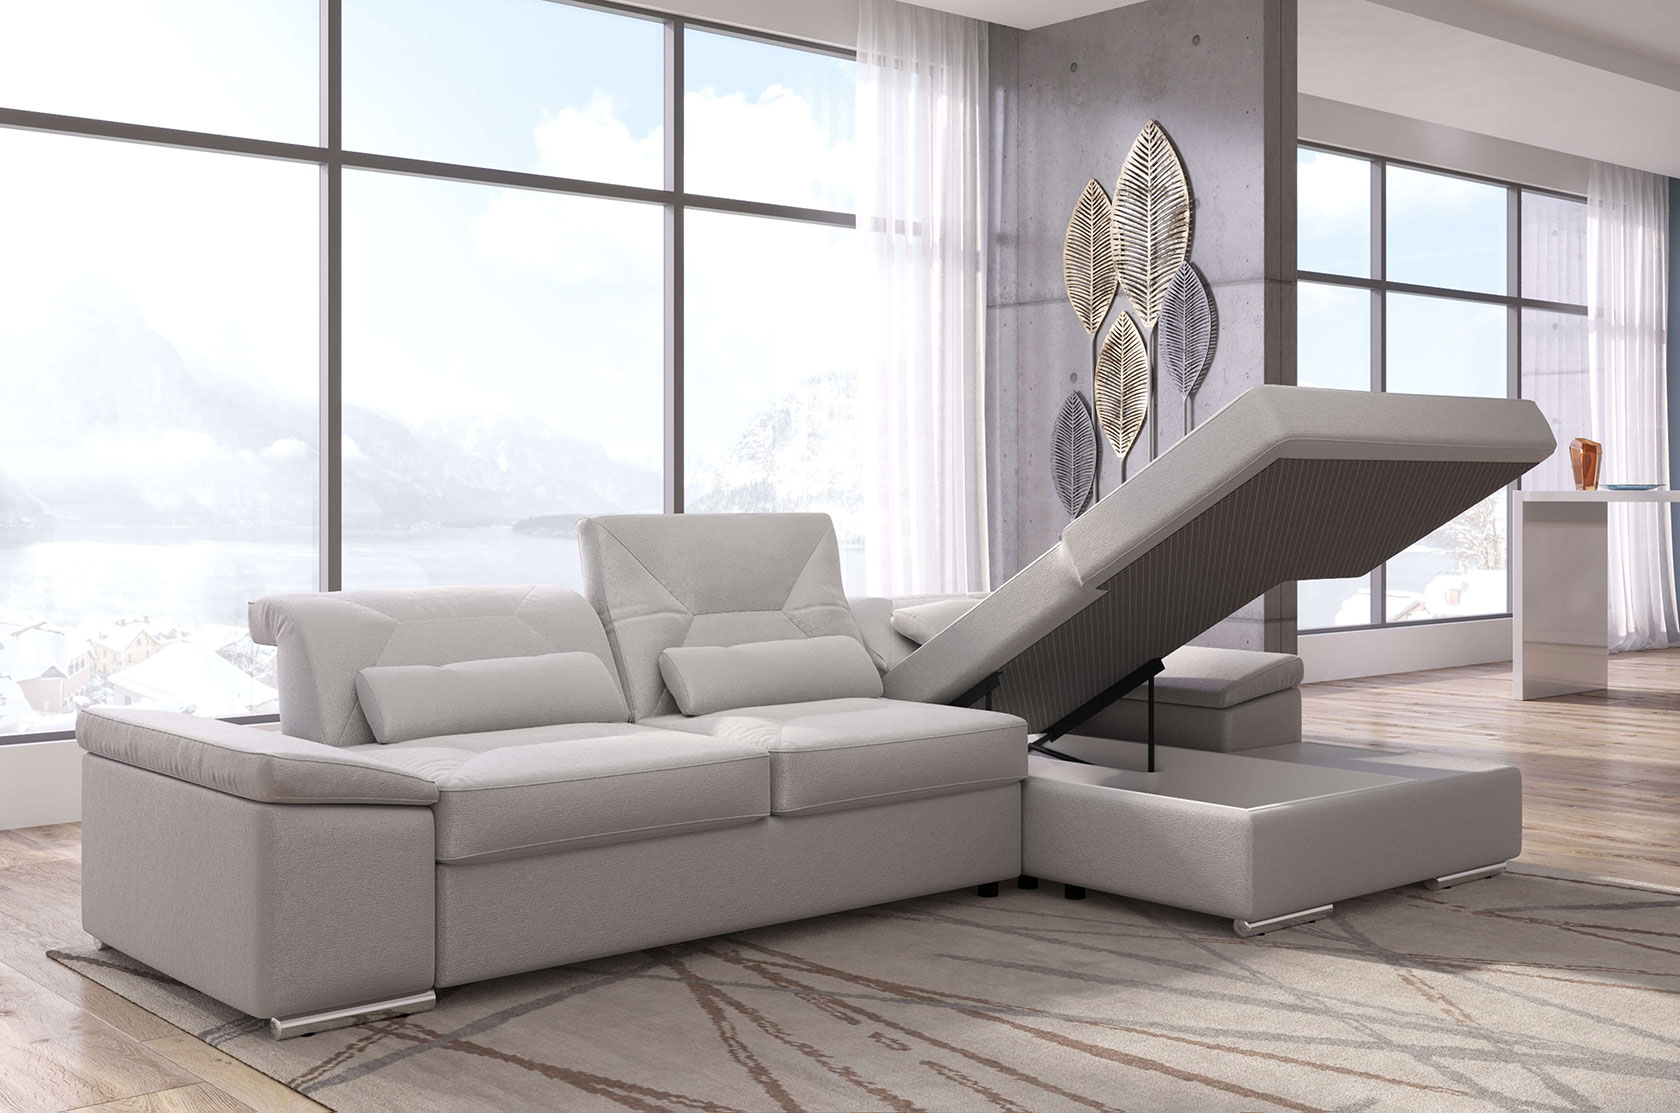 Luxury Leather Sectional Couch